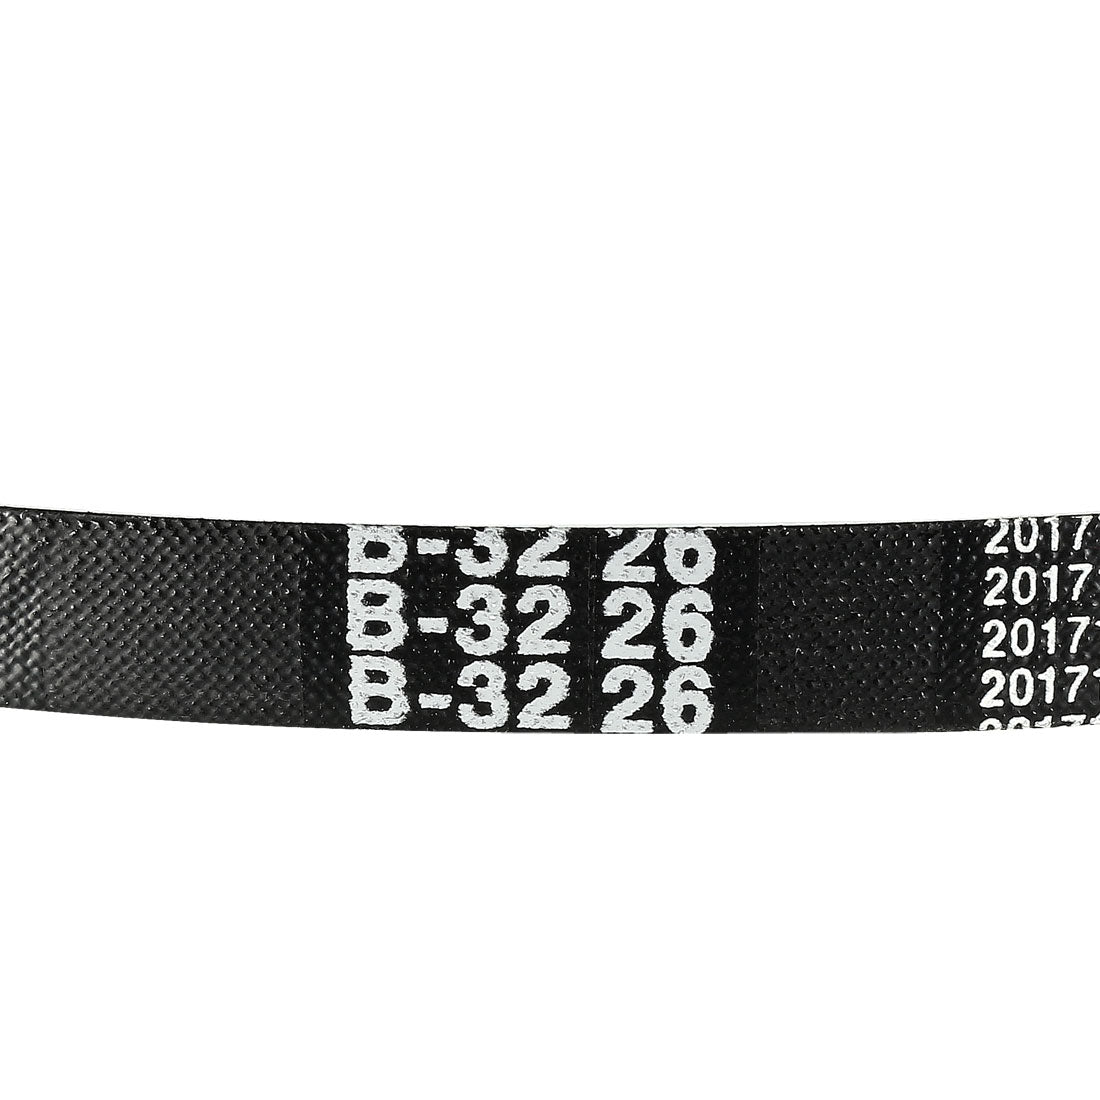 uxcell Uxcell B-127 V-Belts 127" Pitch Length, B-Section Rubber Drive Belt